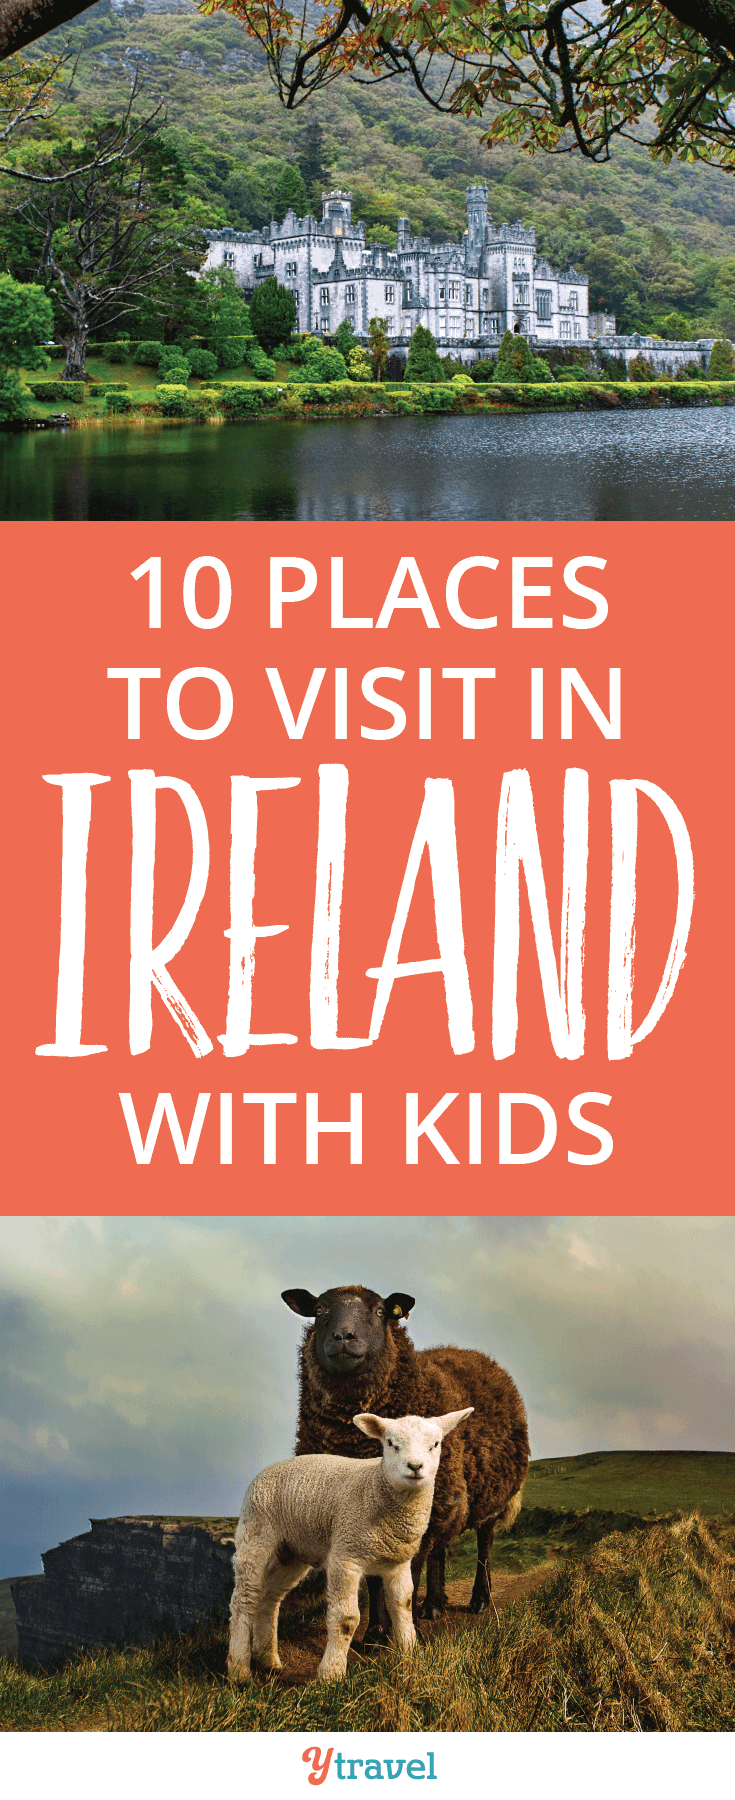 Check out these awesome places to visit in Ireland with kids! Ireland is a great destination for family travel.